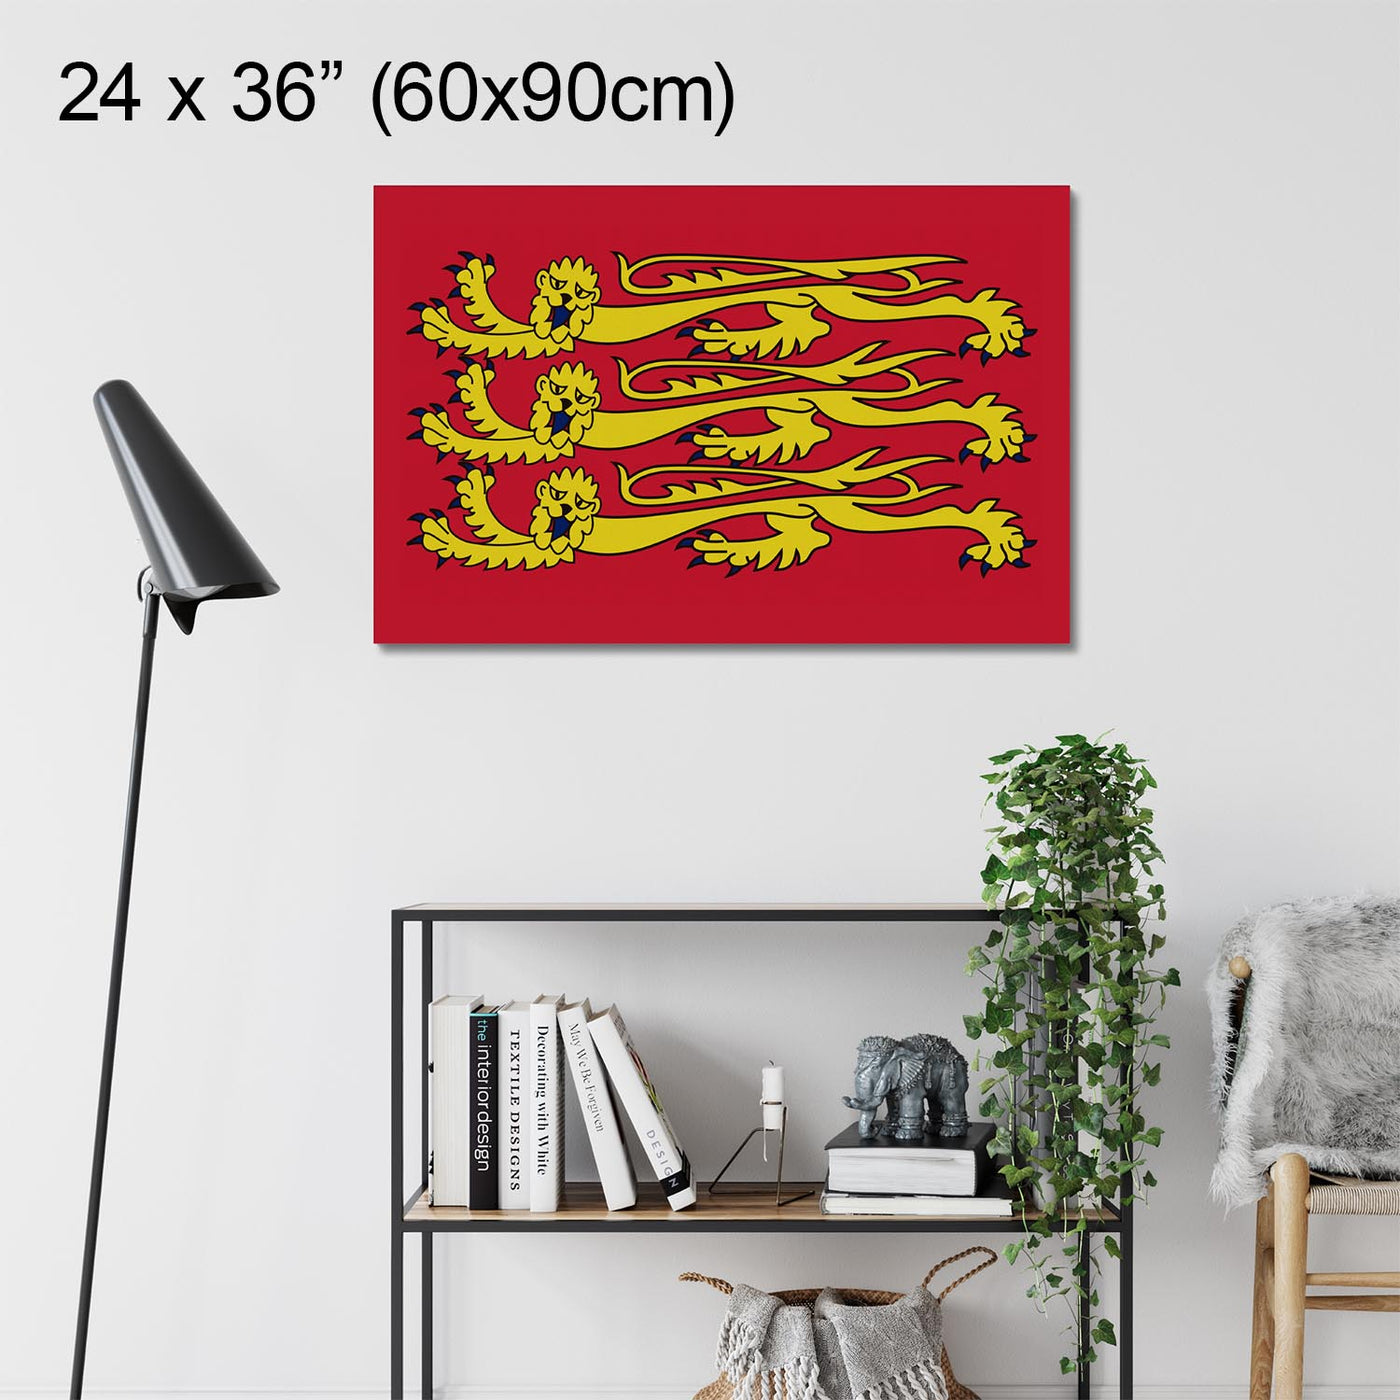 "Three Lions Royal Standard of England" on Framed Prints, Canvas, Aluminium, Acrylic or Print-only